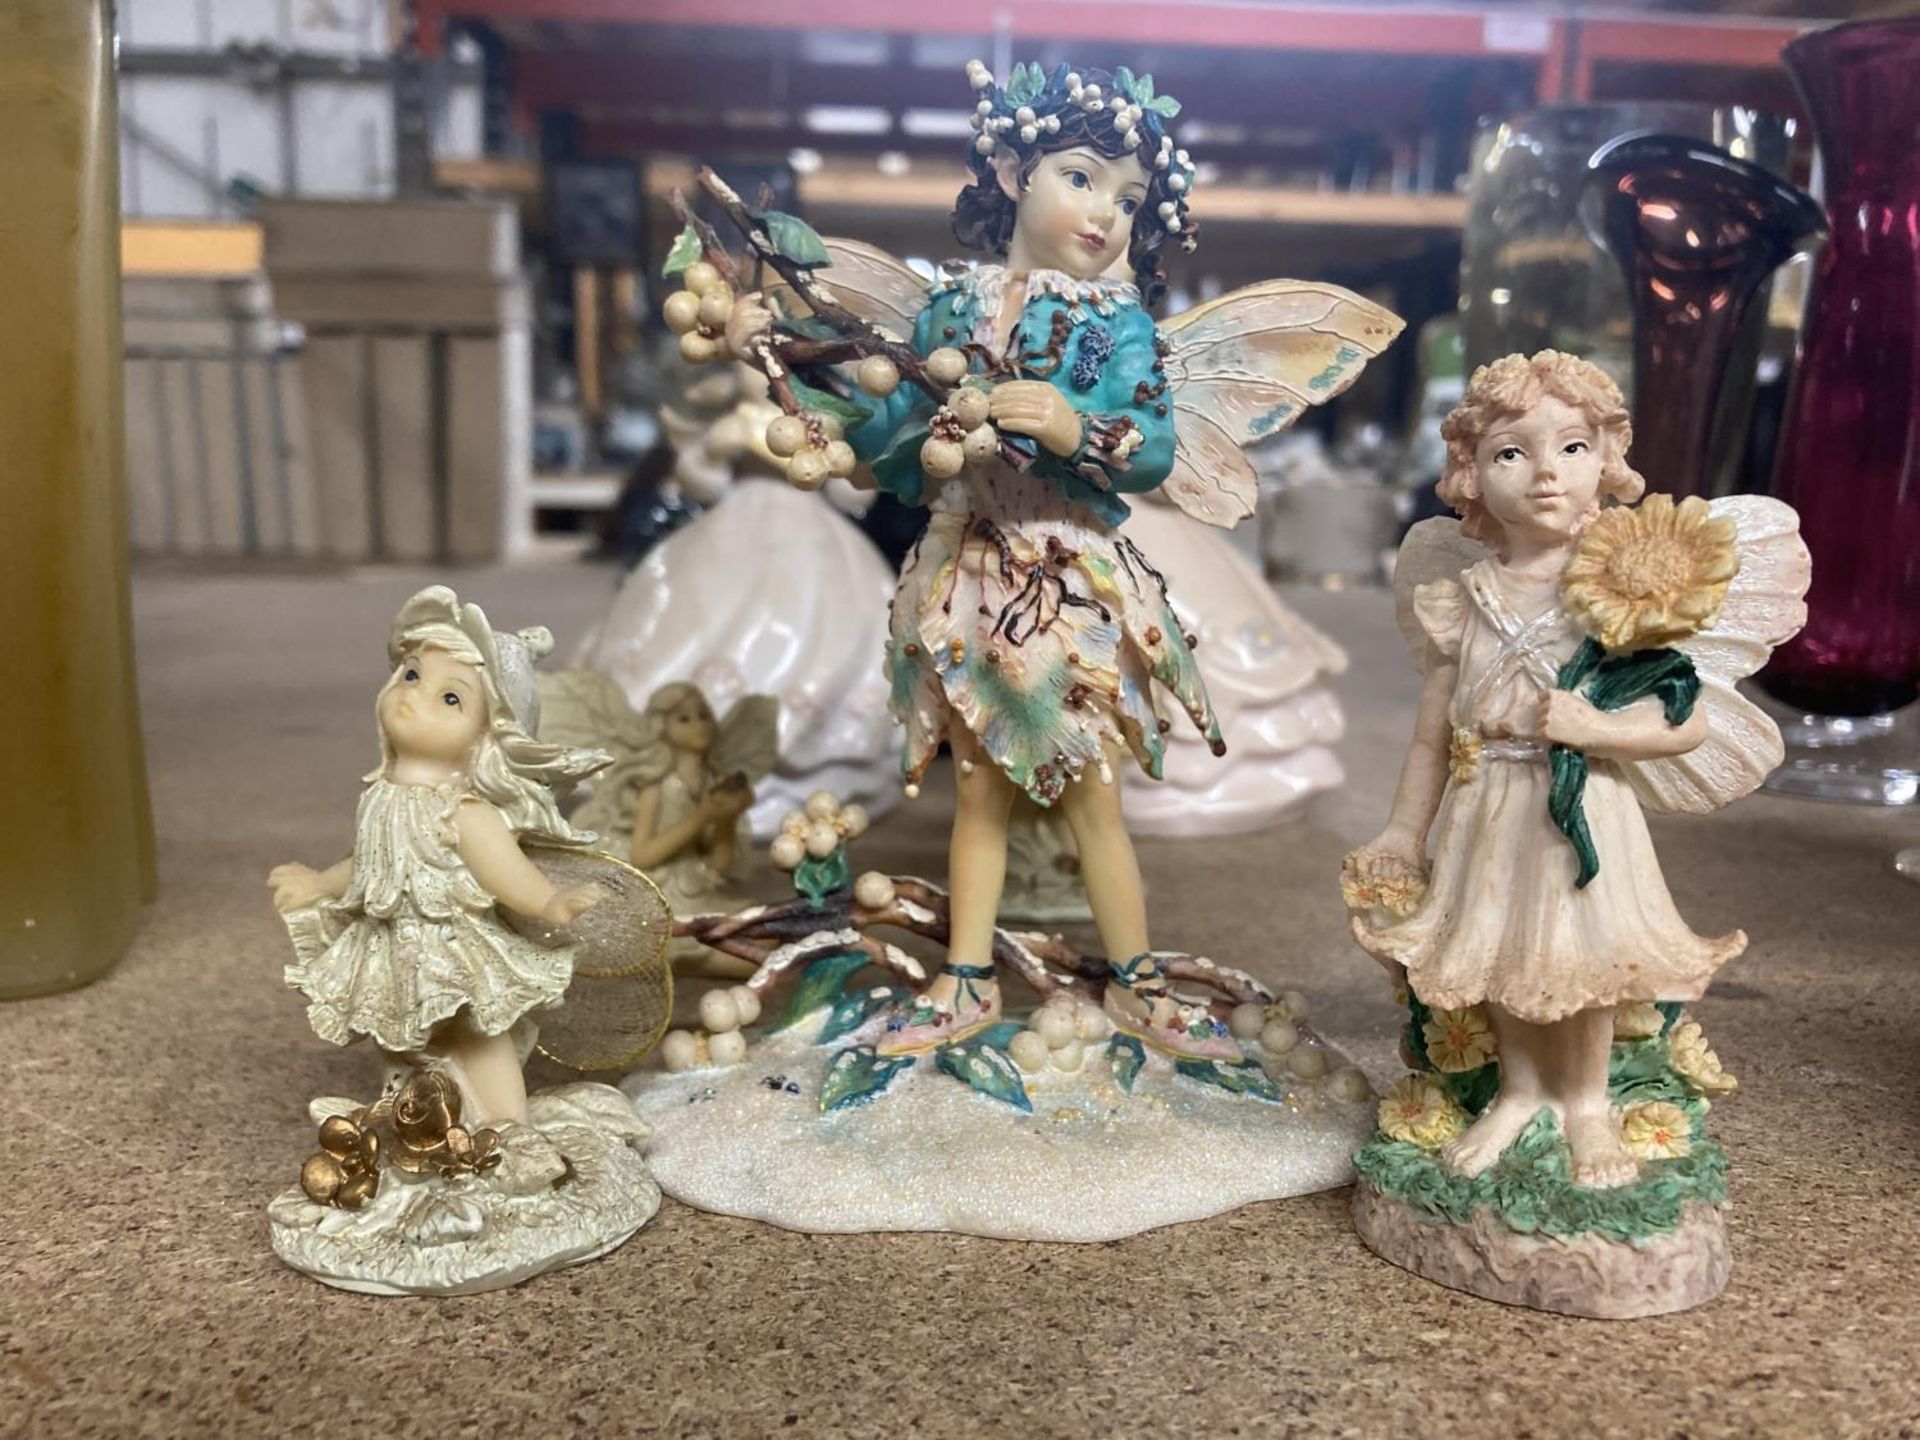 A QUANTITY OF CERAMIC ITEMS TO INCLUDE FAIRY FIGURINES, A VINTAGE LADY FIGURE AND AN ELEPHANT - Image 4 of 4